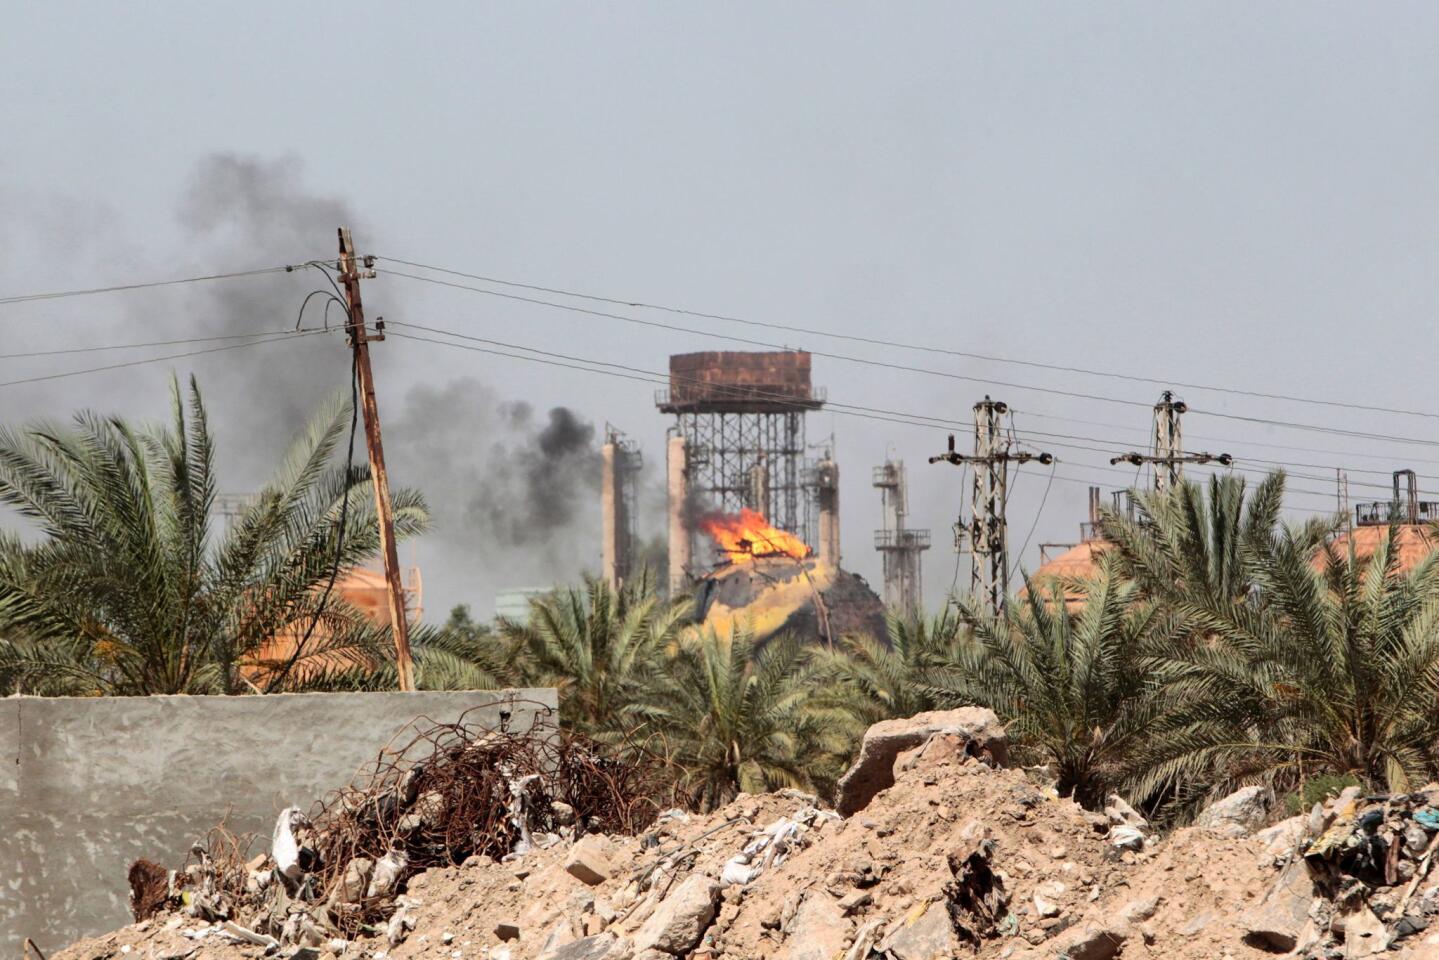 Flames and smoke rise from tanks after a suicide bomb attack on the Taji gas plant, about 12 miles north of the Iraqi capital Baghdad, on May 15, 2016.